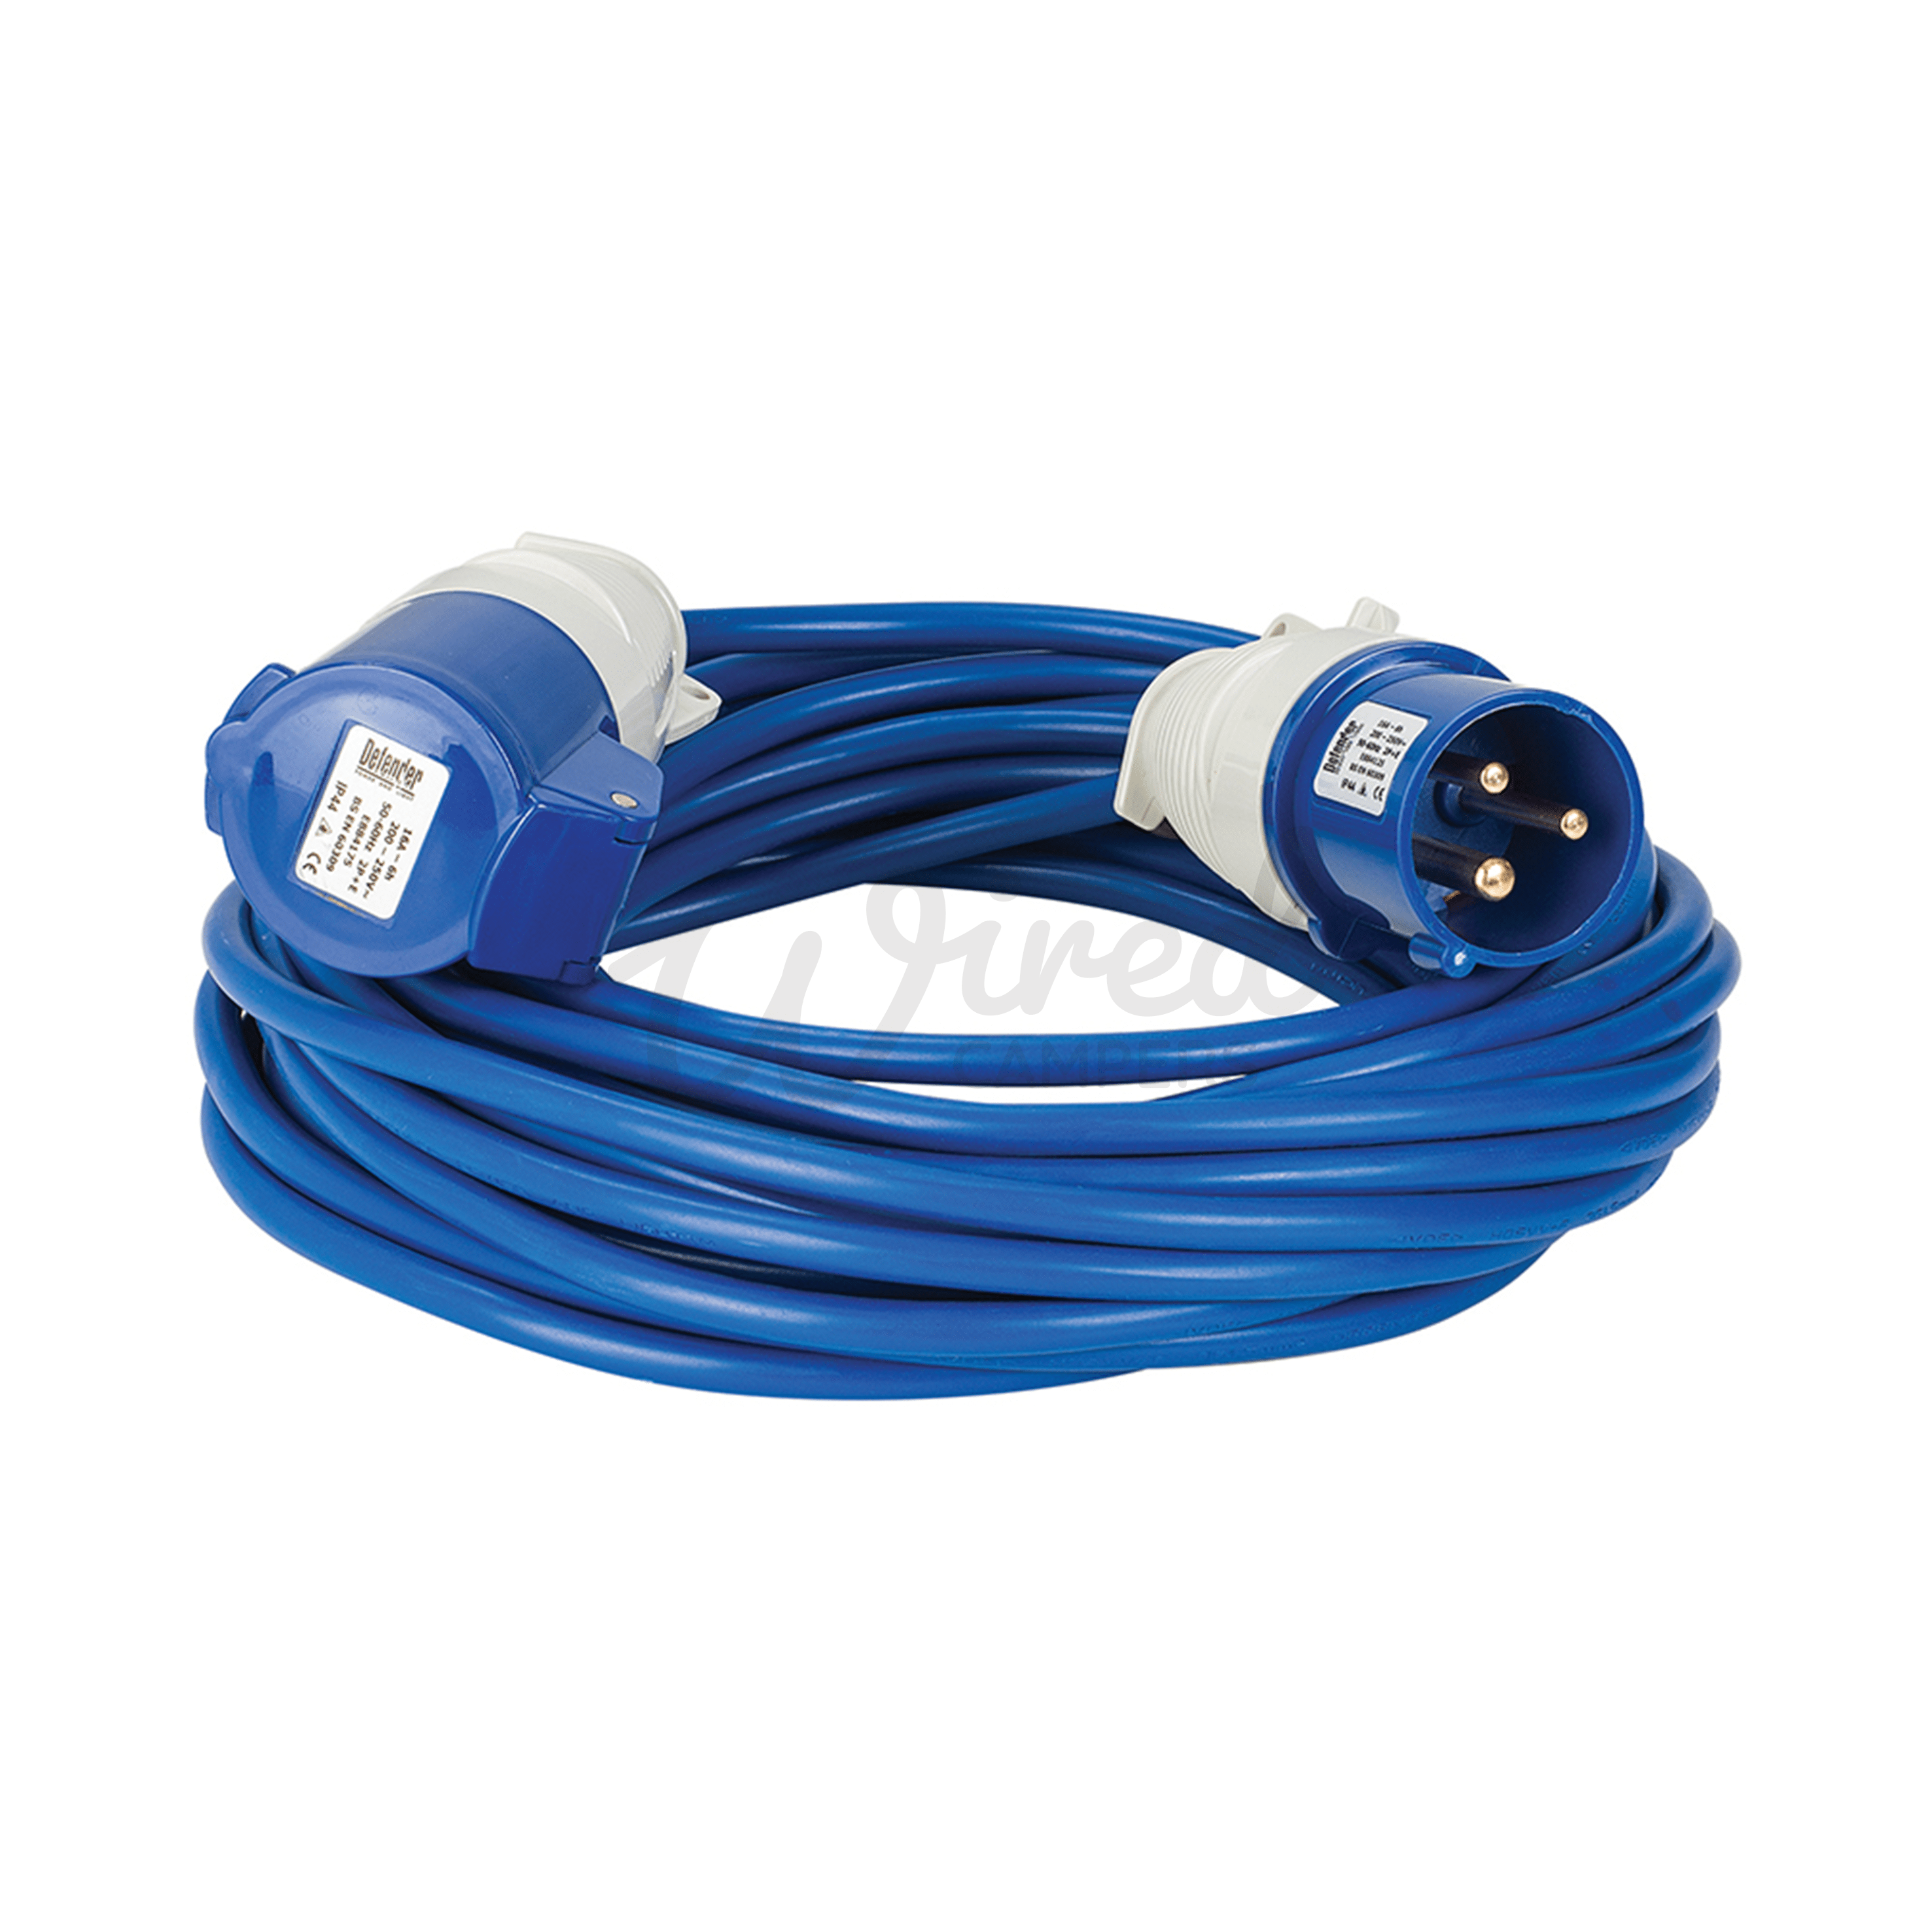 Wired Campers Limited 14M Camper Van Arctic Blue 16A Extension Leisure Hook Up Lead 2.5mm2